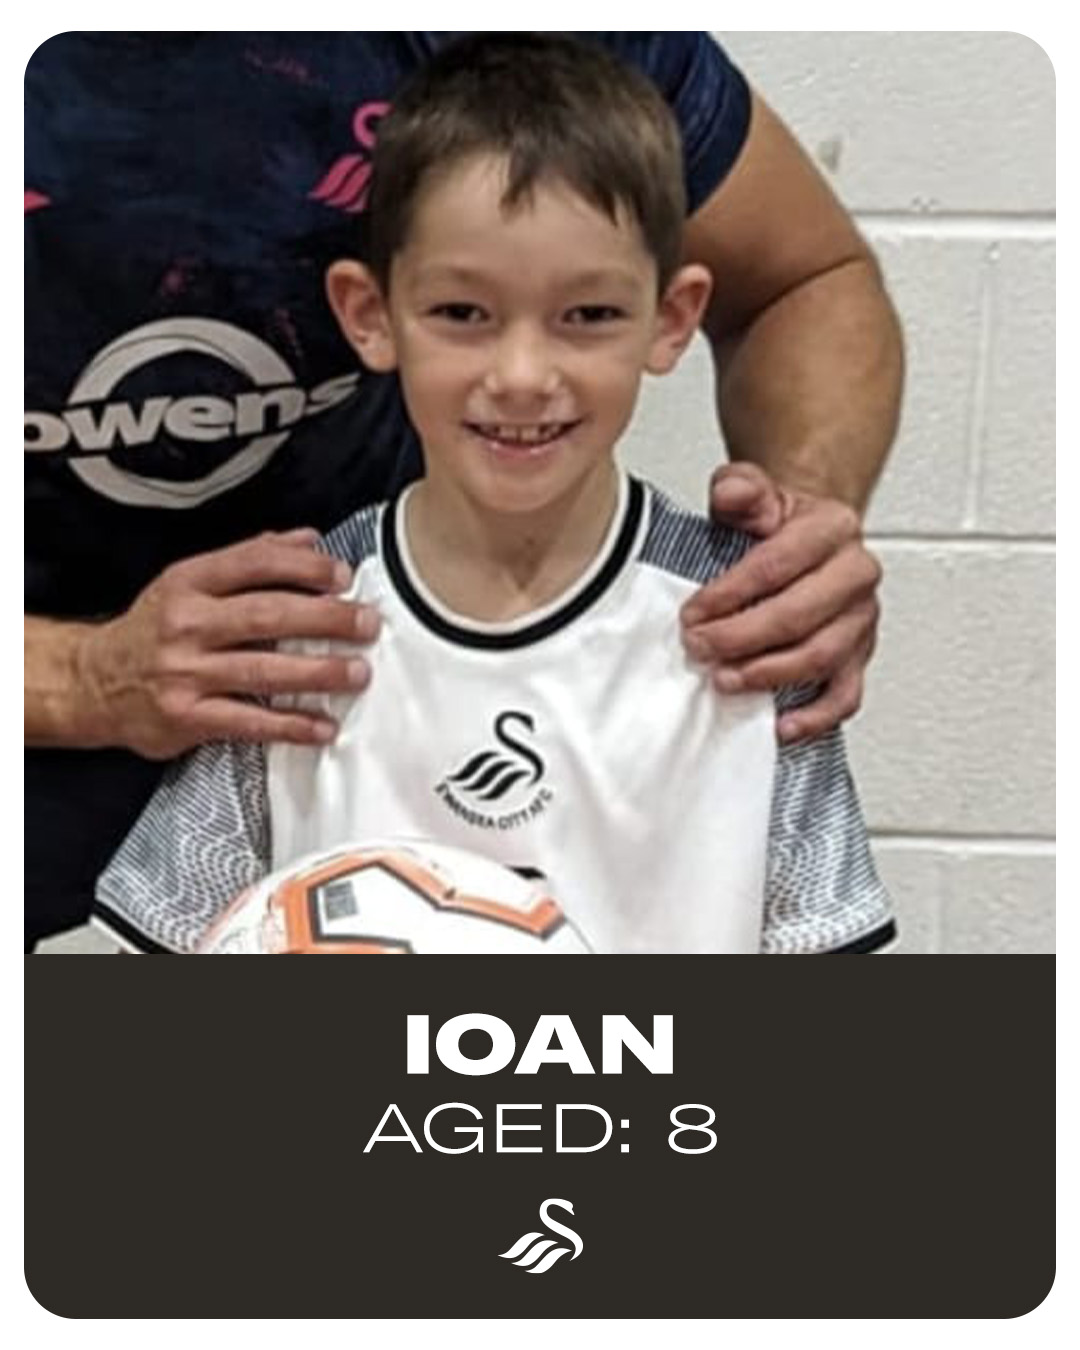 Photograph of Ioan, aged 8